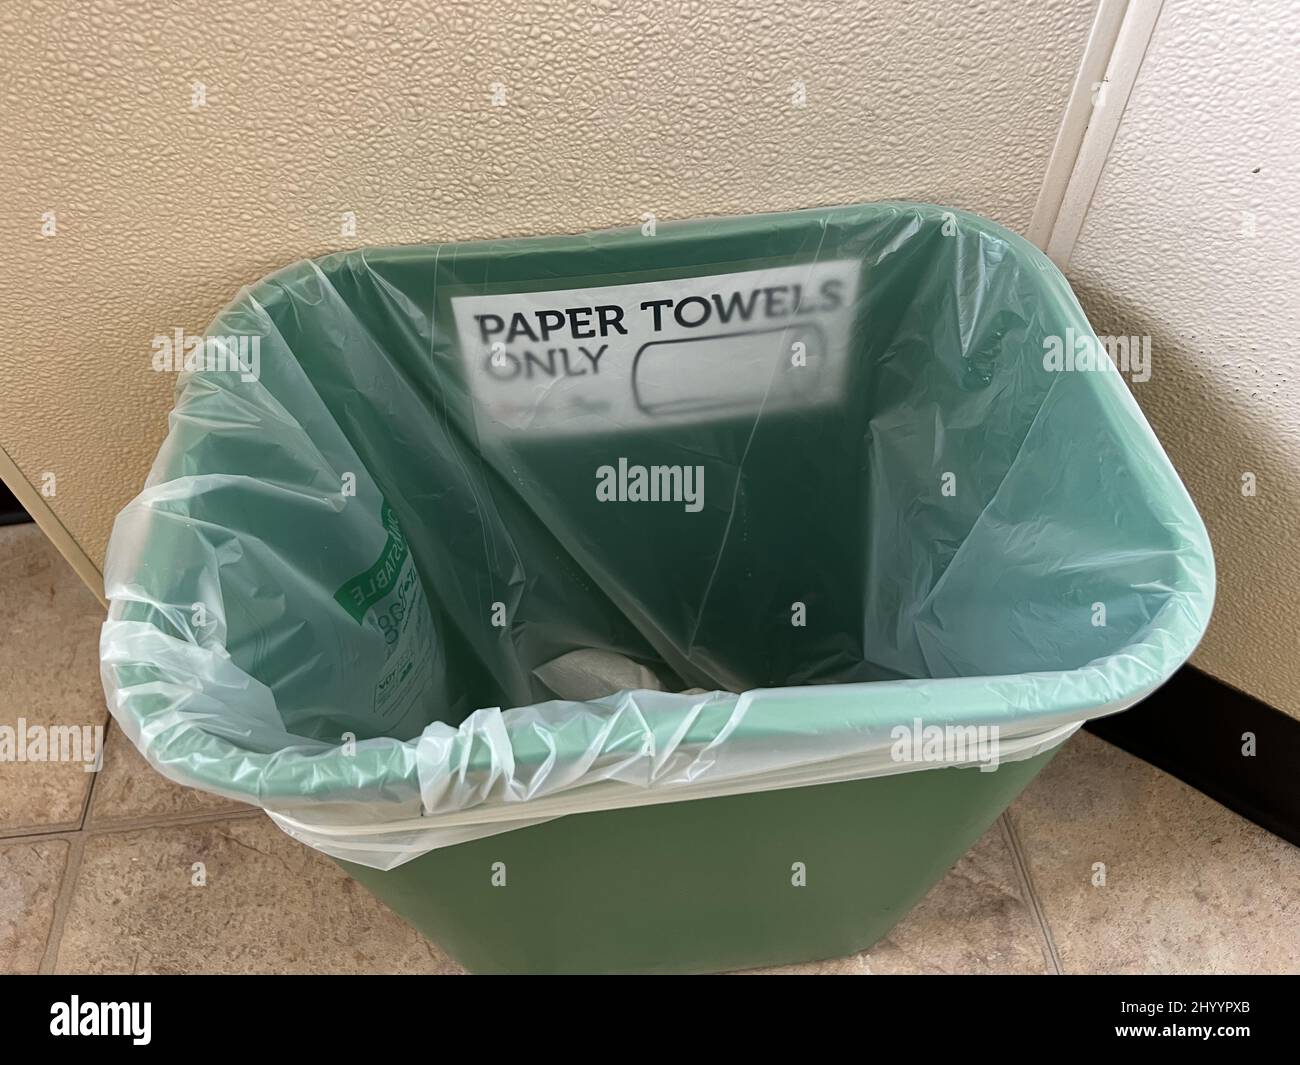 https://c8.alamy.com/comp/2HYYPXB/green-compost-bin-with-compostable-plastic-liner-with-label-reading-paper-towels-only-lafayette-california-january-21-2022-photo-by-smith-collectiongadosipa-usa-2HYYPXB.jpg